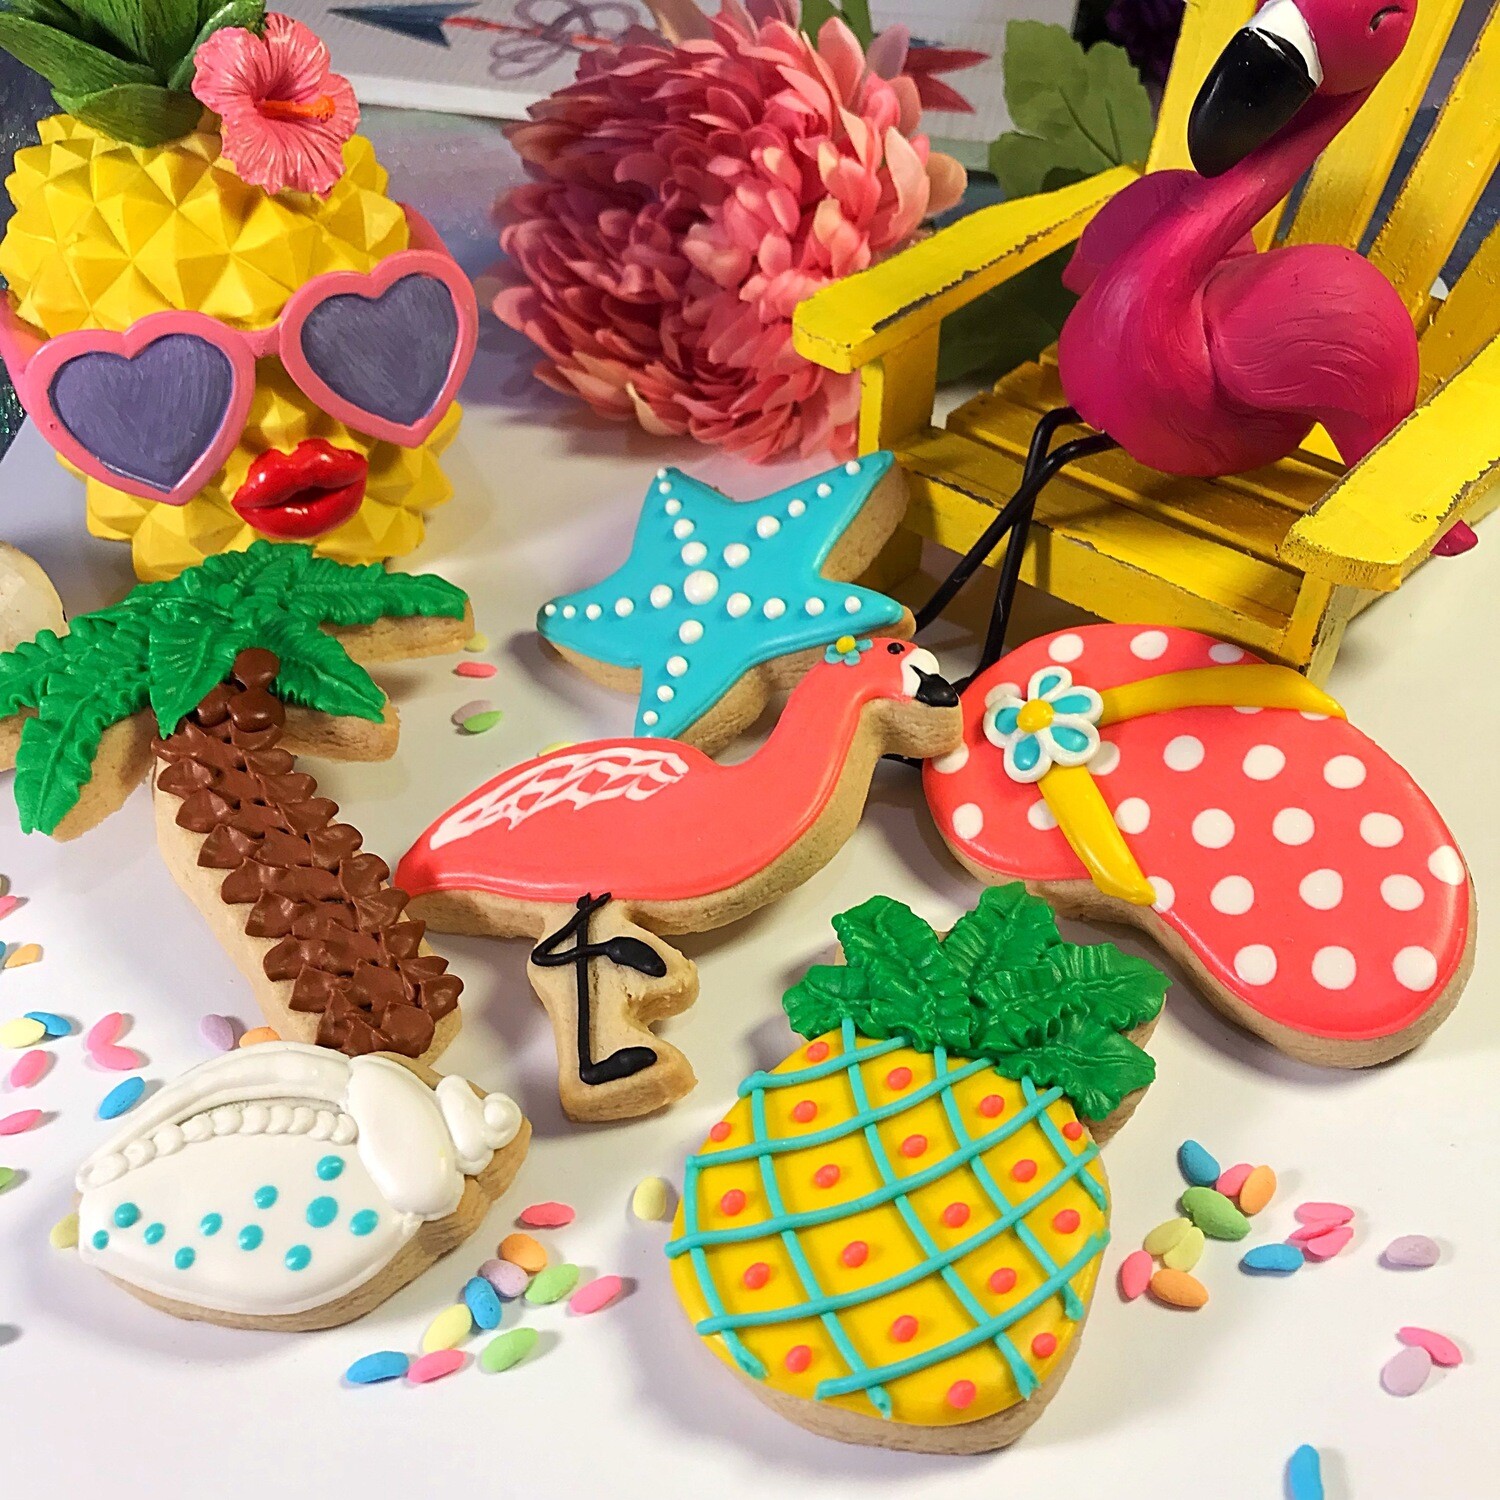 SUMMER TIME Decorating Workshop - SUNDAY, JUNE 23, 2019 at 3:00 p.m. (THE POTPOURRI HOUSE) - CHILD TICKET (Ages 6-12)